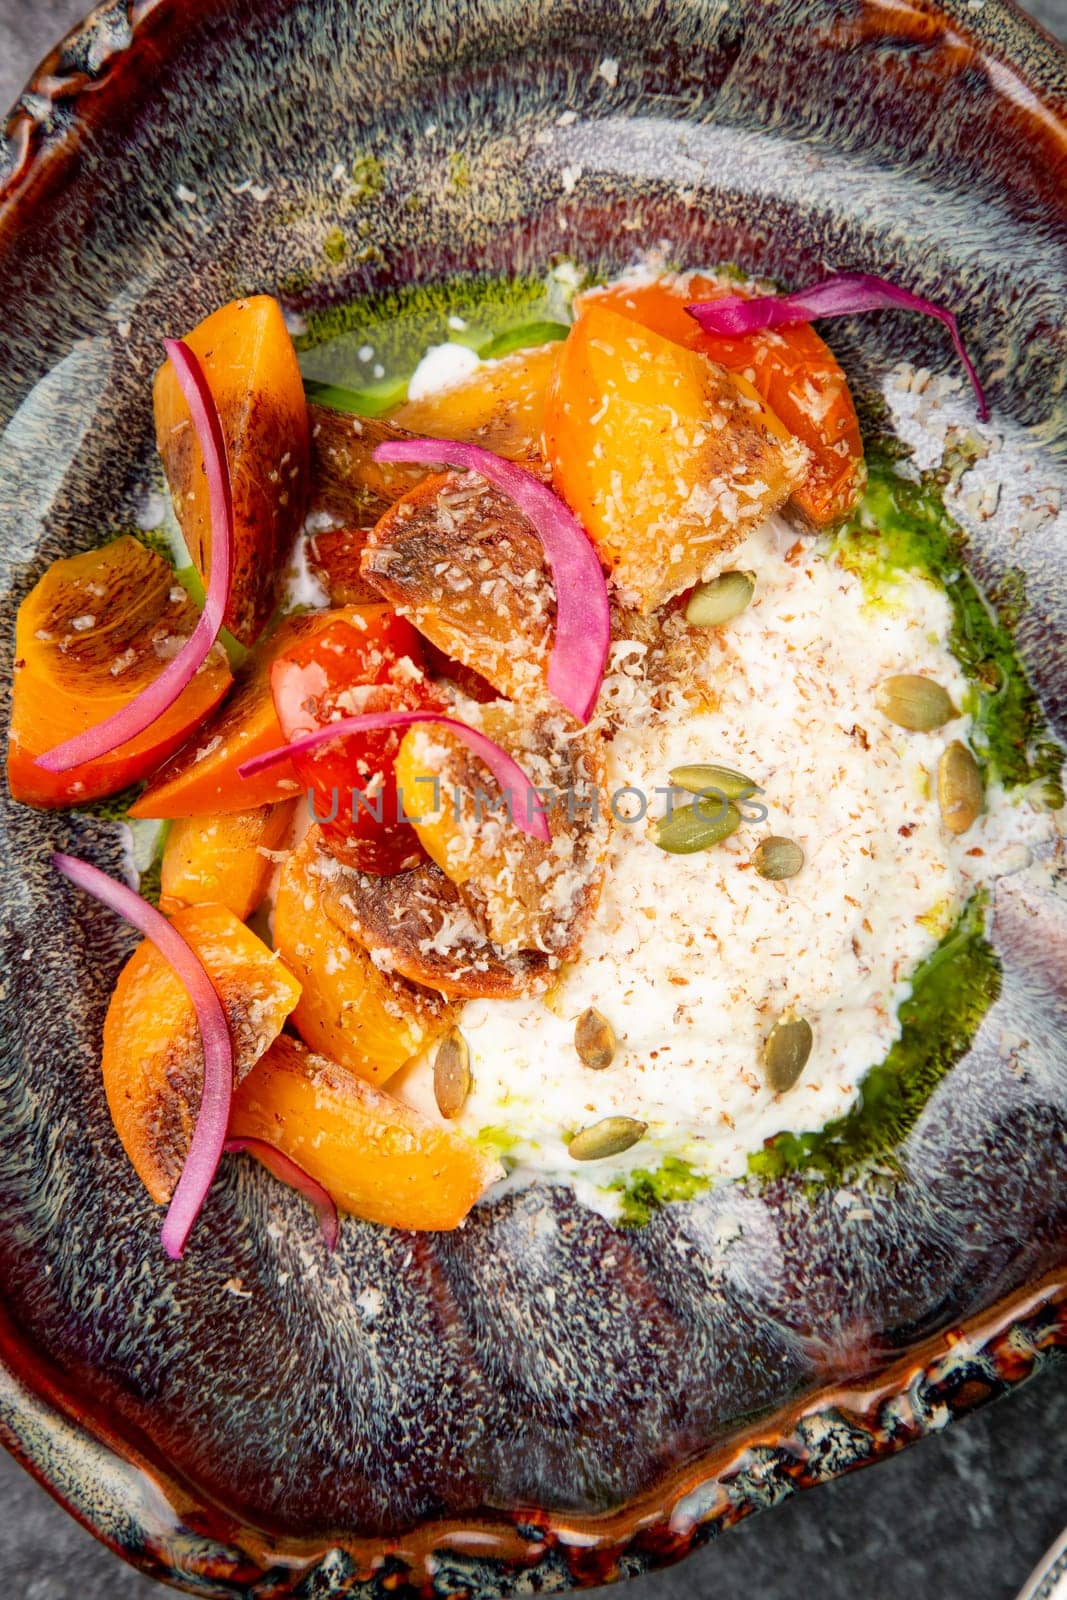 dish of baked persimmons, colored peppers, rice and seeds